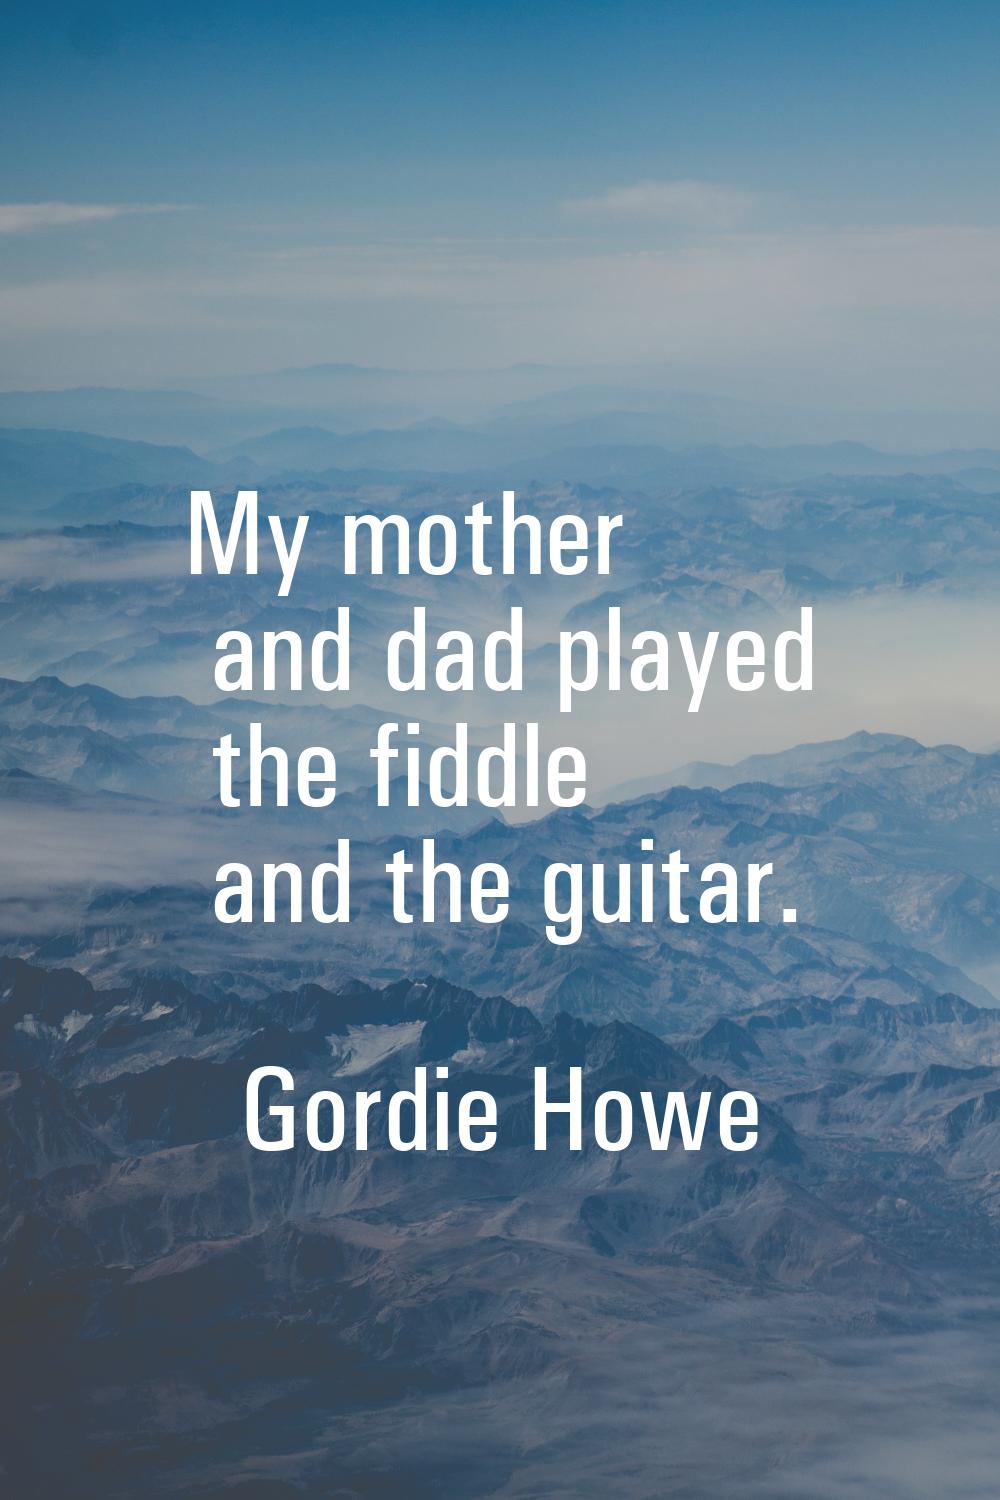 My mother and dad played the fiddle and the guitar.